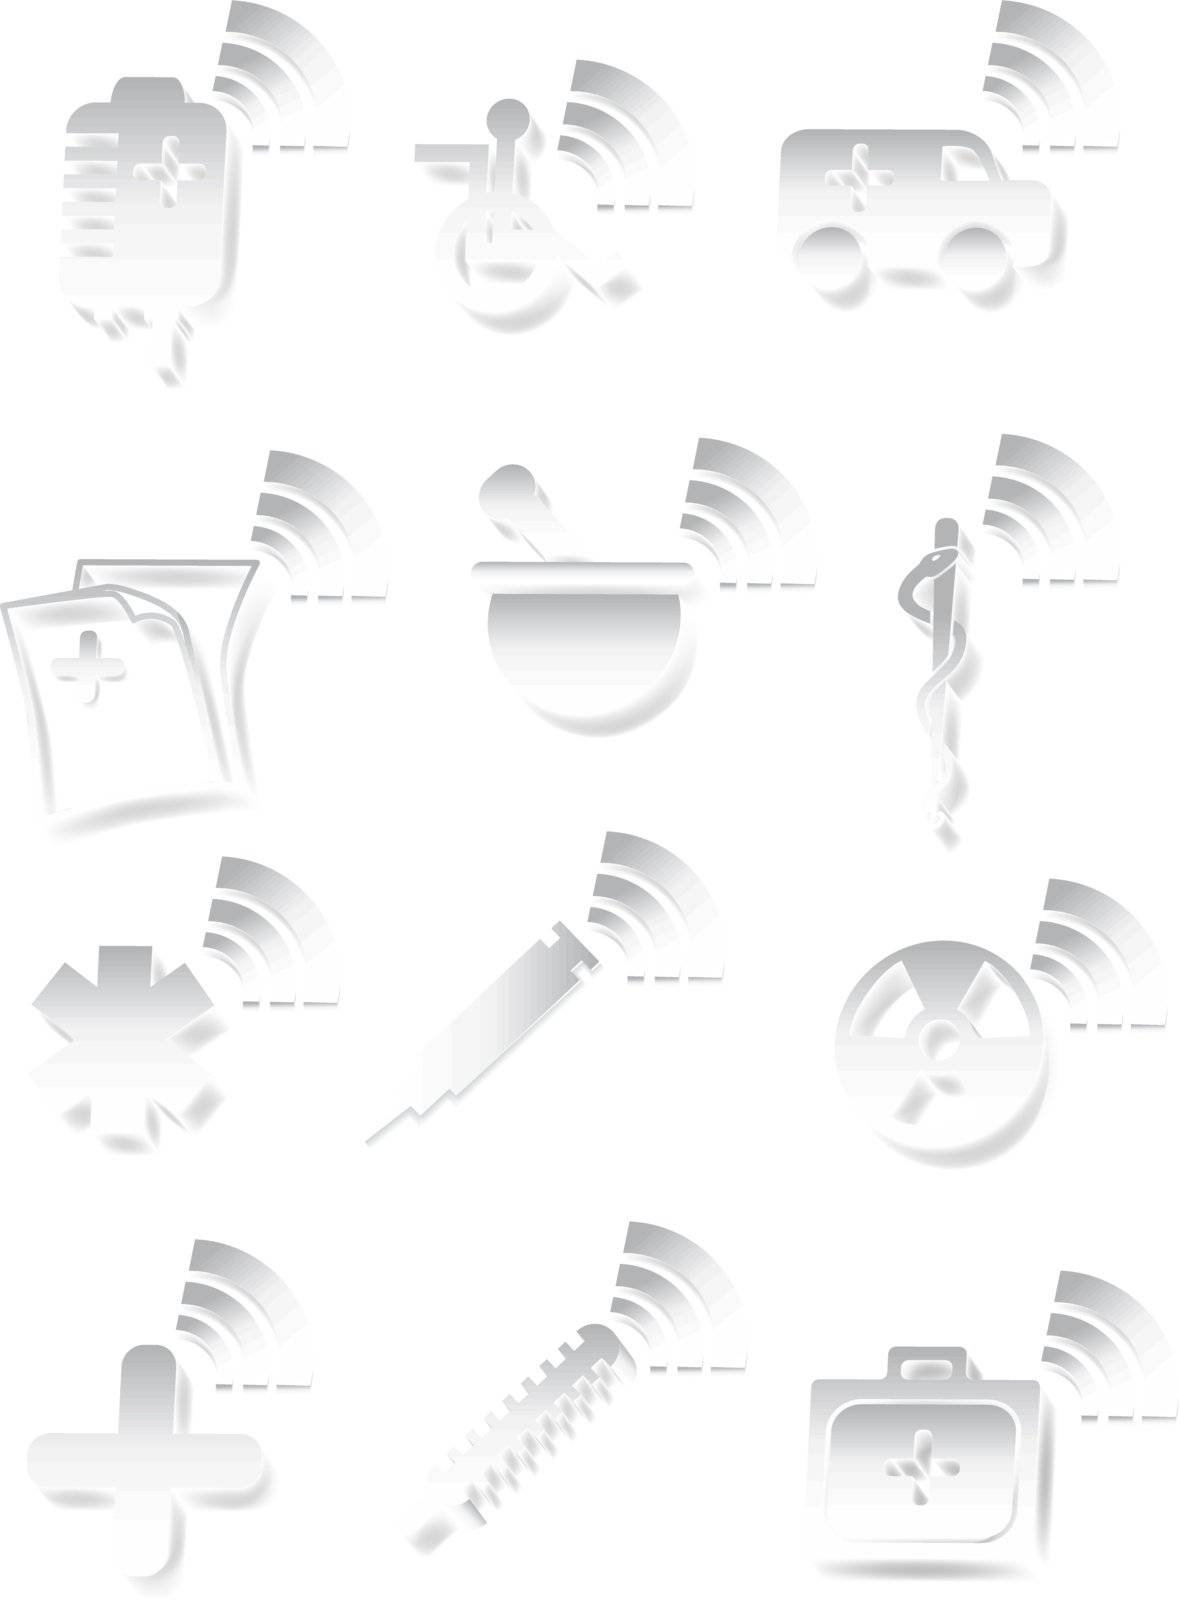 Medical 3D Icon Set - Black and White by cteconsulting